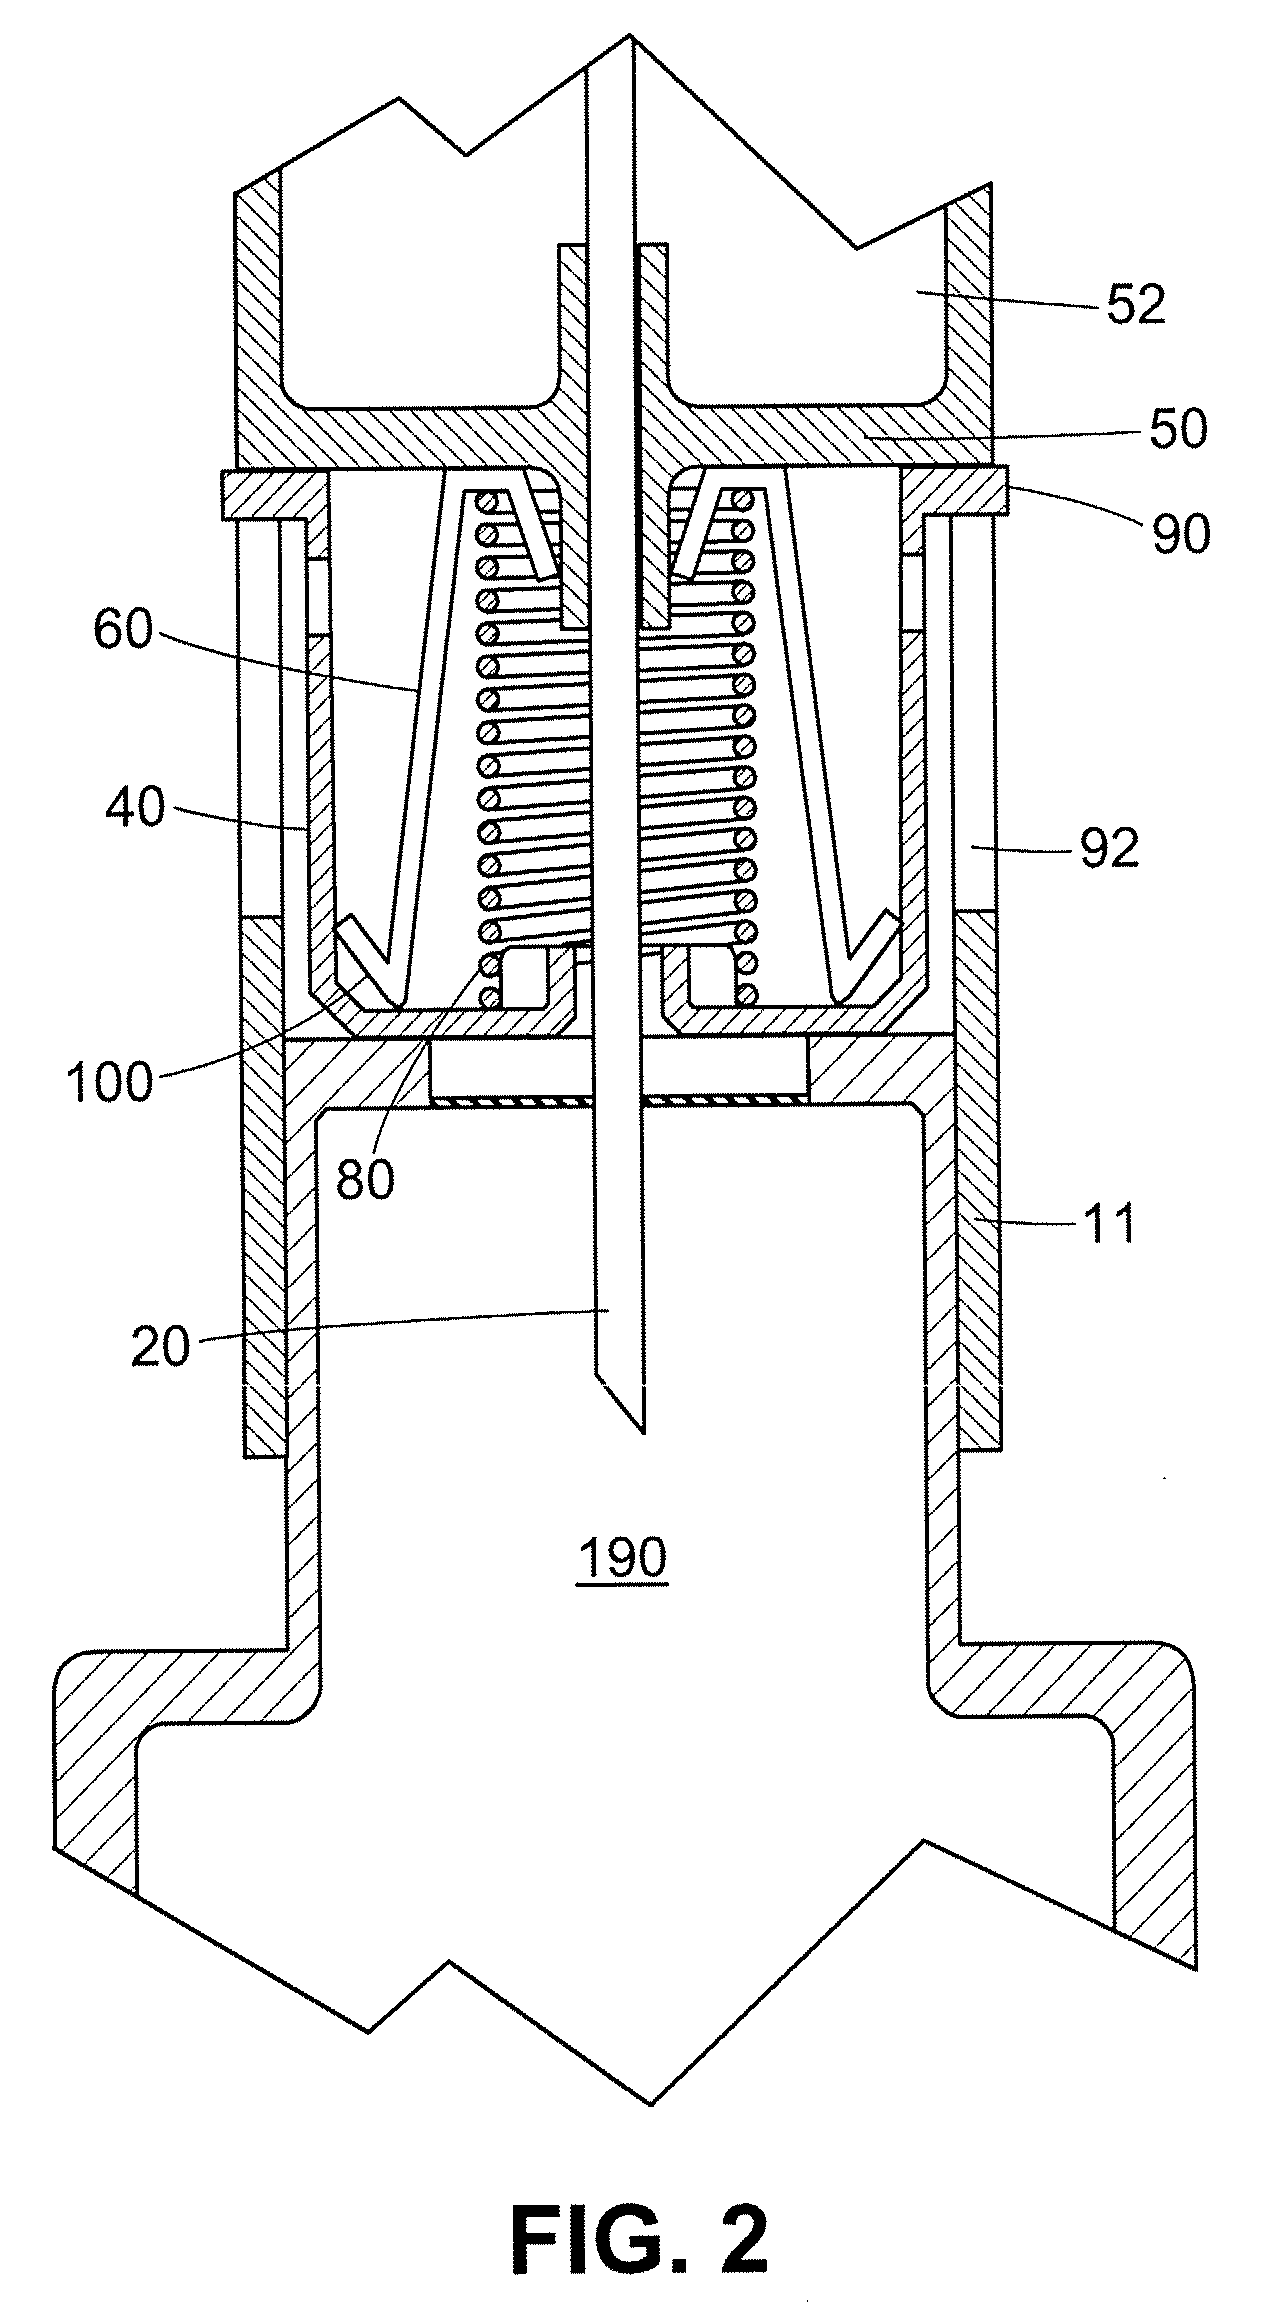 Safety shield system for an injection pen needle